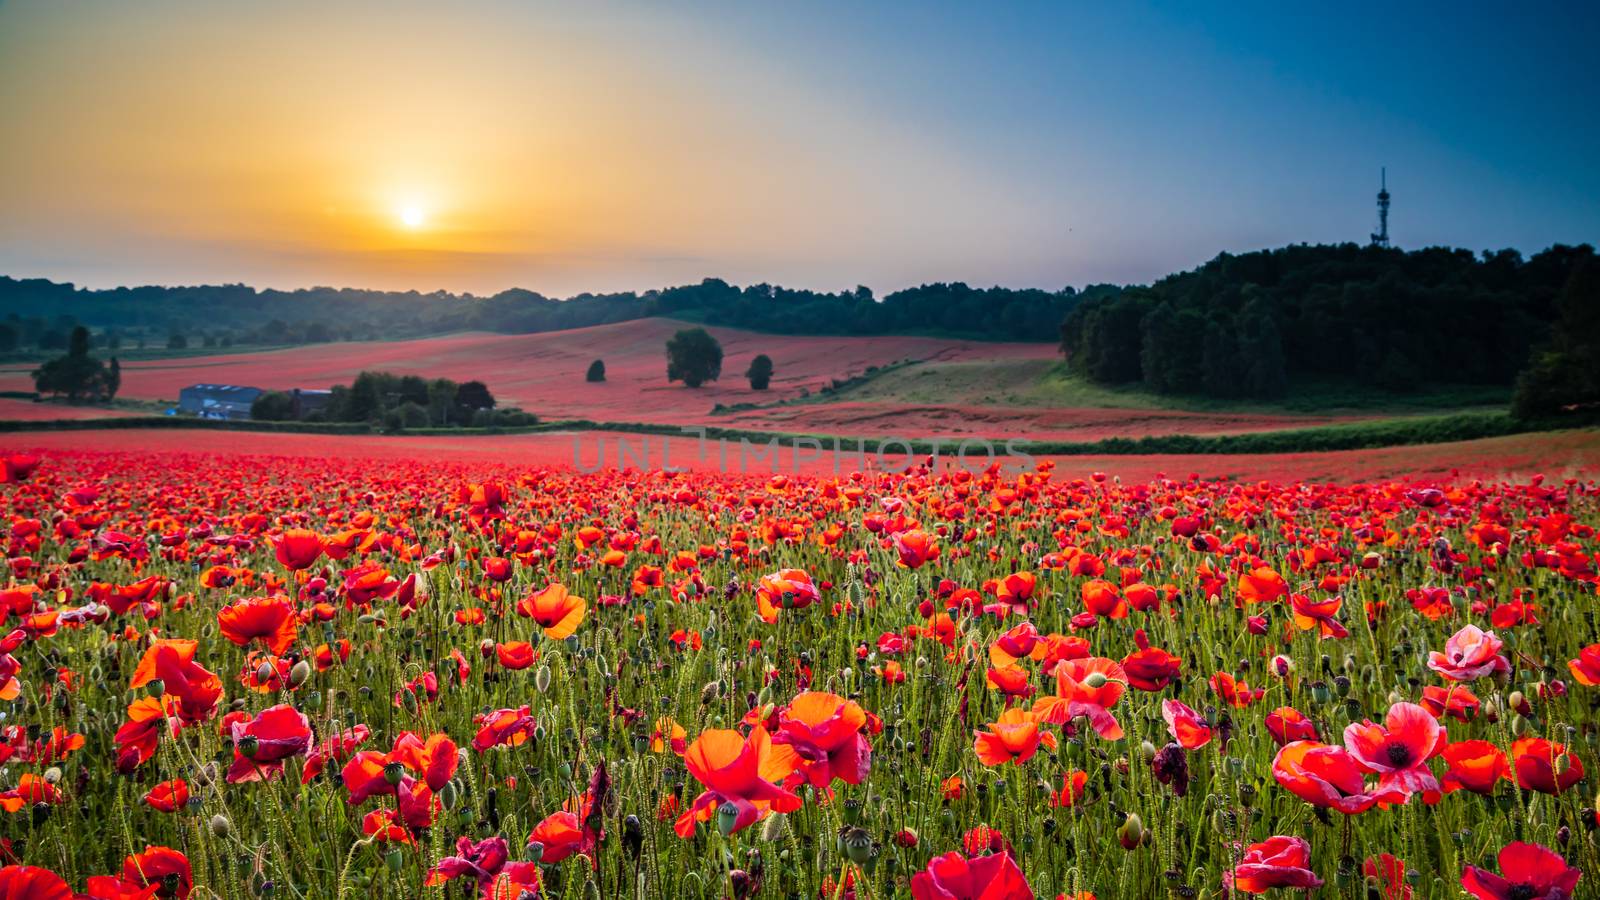 Beautiful Poppy Field at Brewdley, West Midlands at Dawn by kstphotography